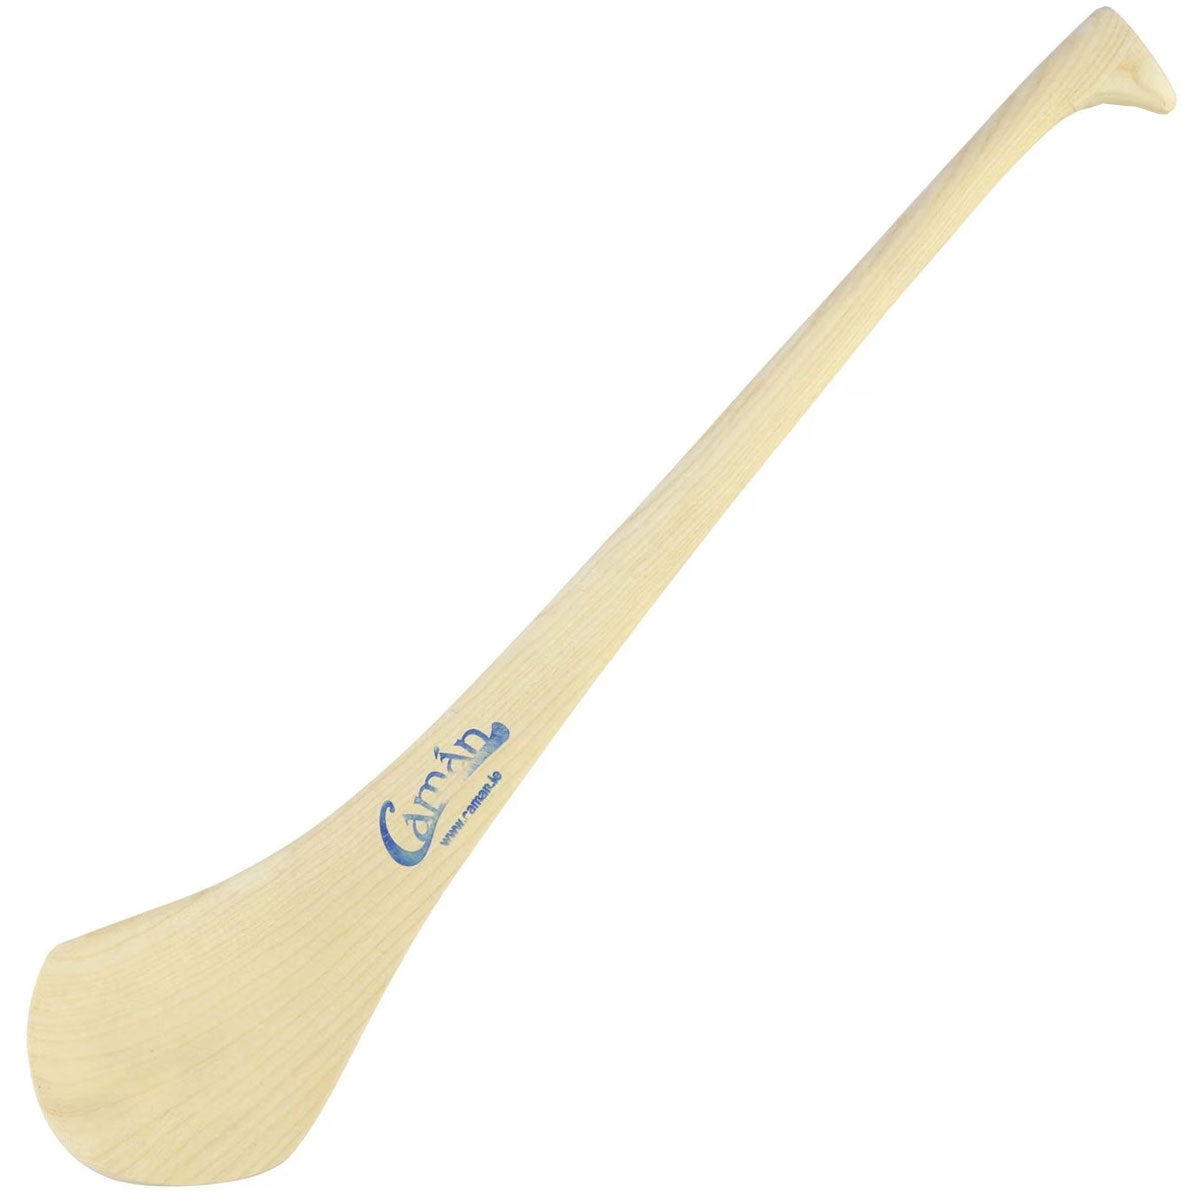 Caman Hurling Stick size 36 (Inches)